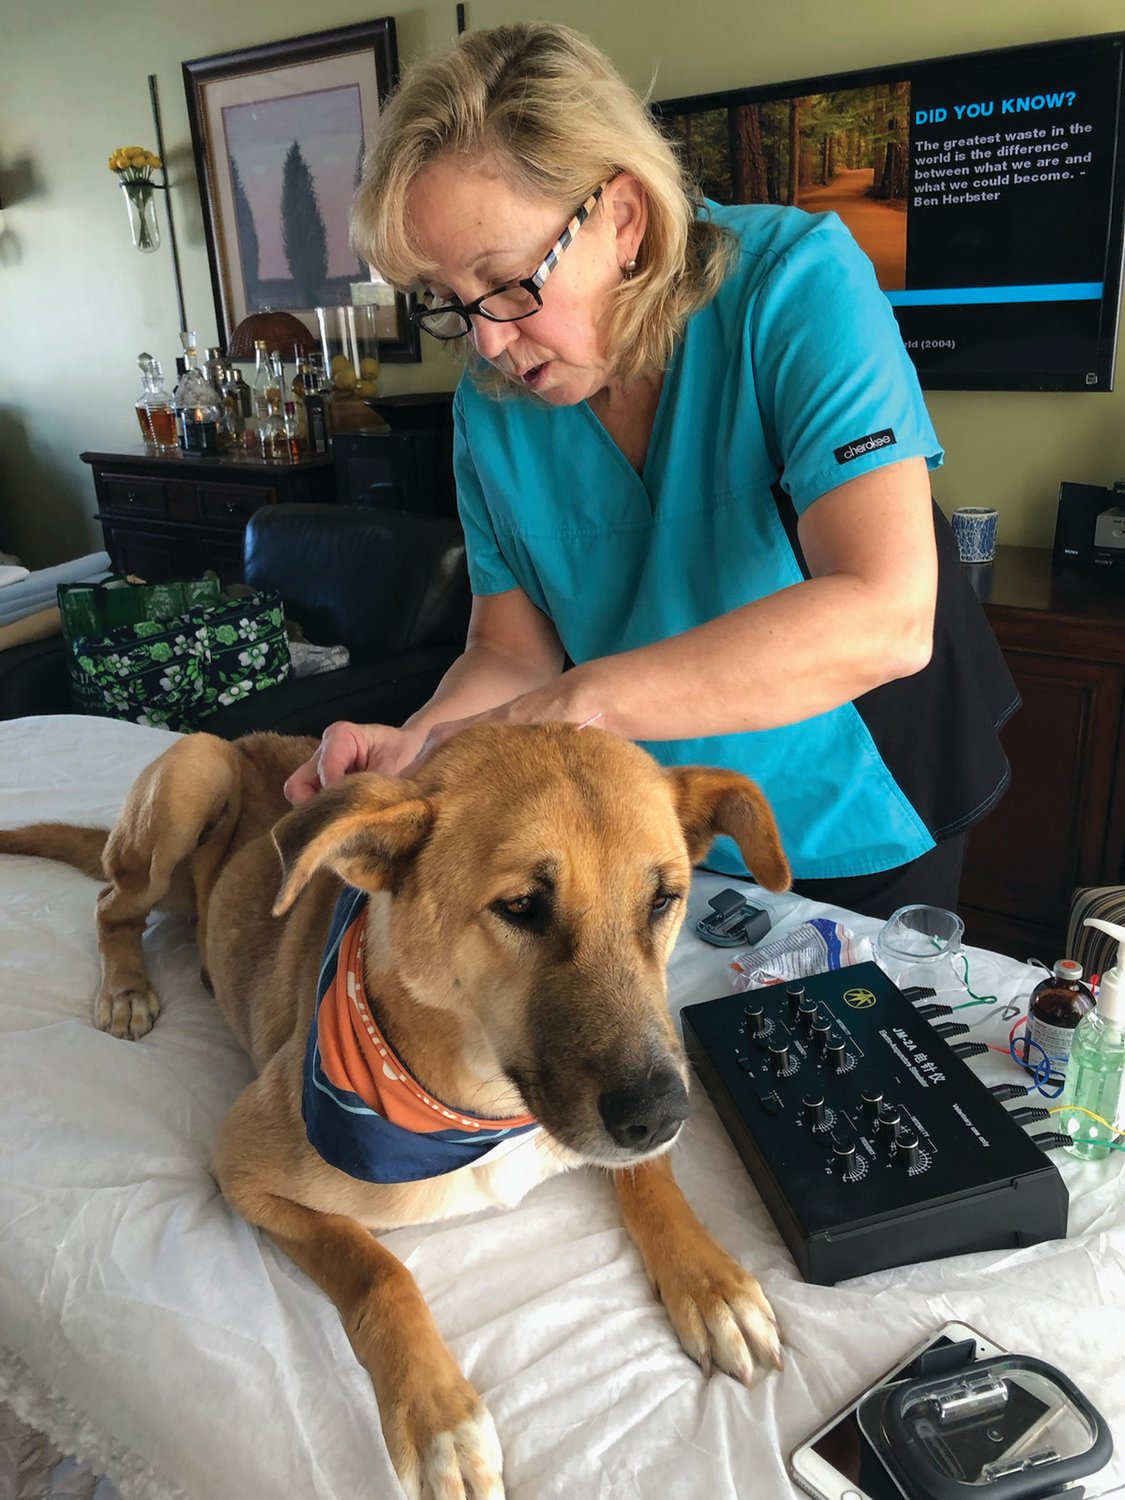 NEEDLE POINTER: Hulk has been receiving acupuncture for years to treat a variety of ailments. The technique has brought him relief, much to his owner’s surprise.